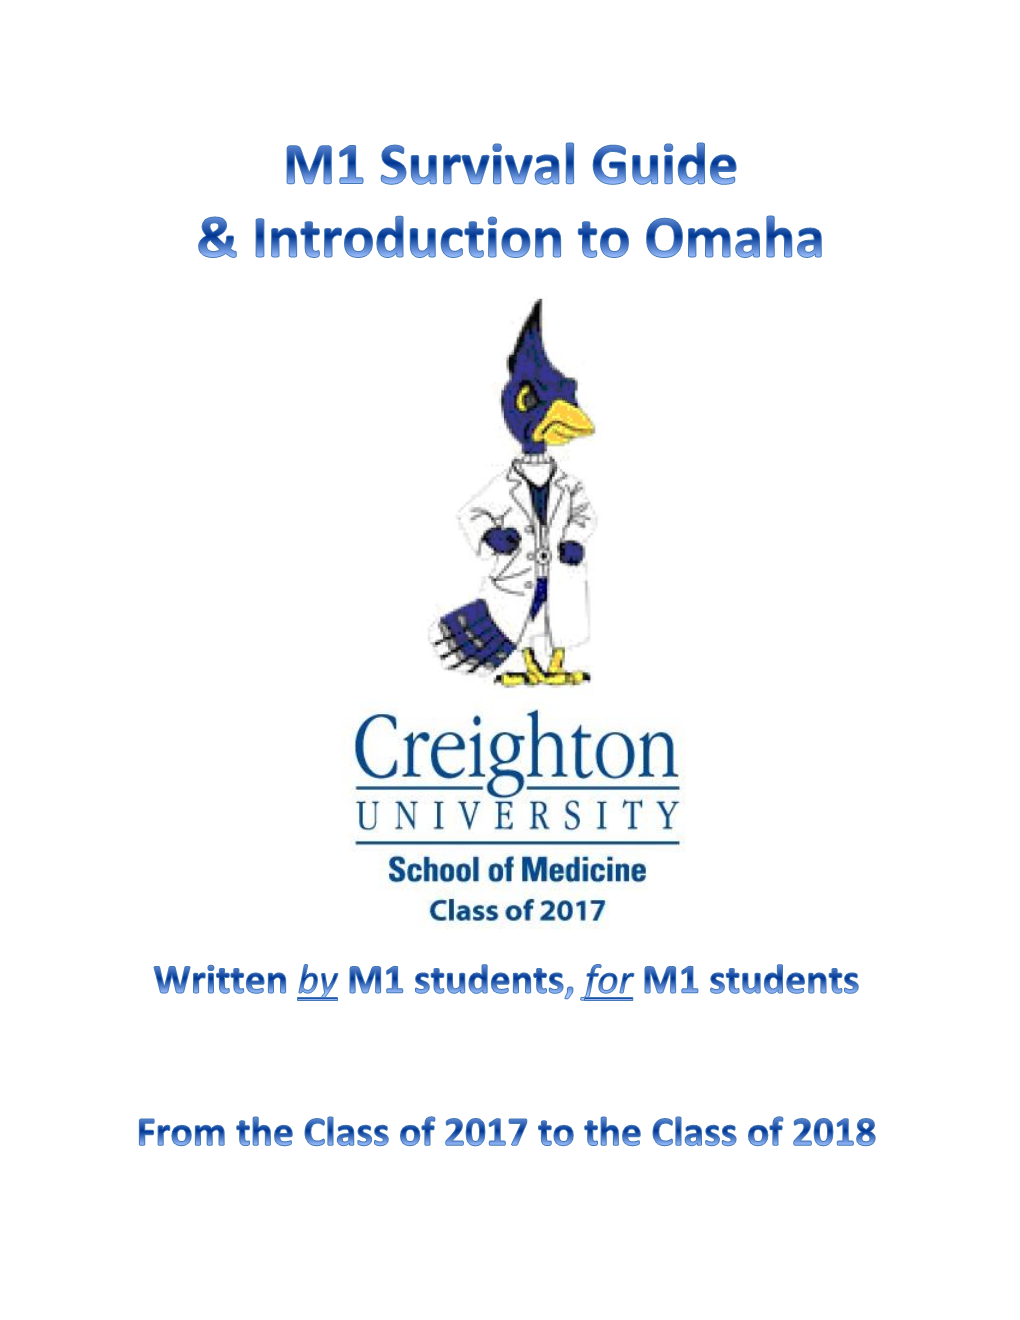 M1 Survival Guide & Introduction to Omaha